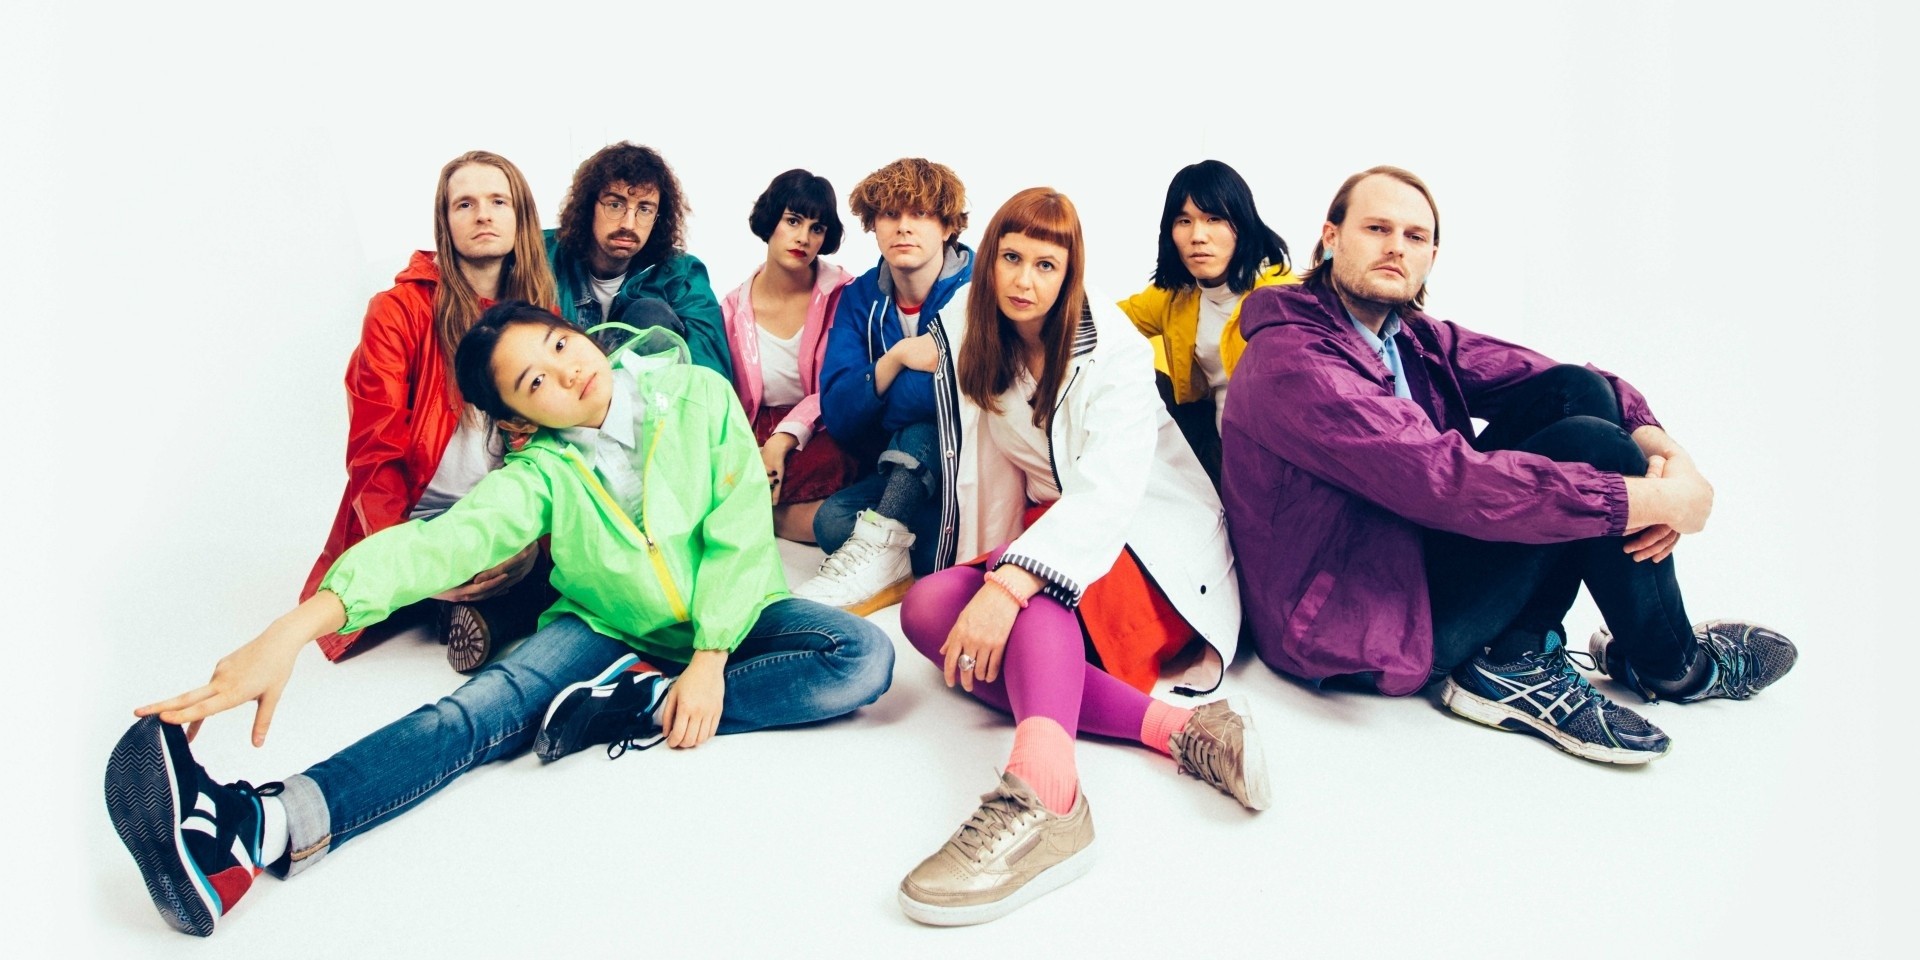 Superorganism to play in Singapore next January